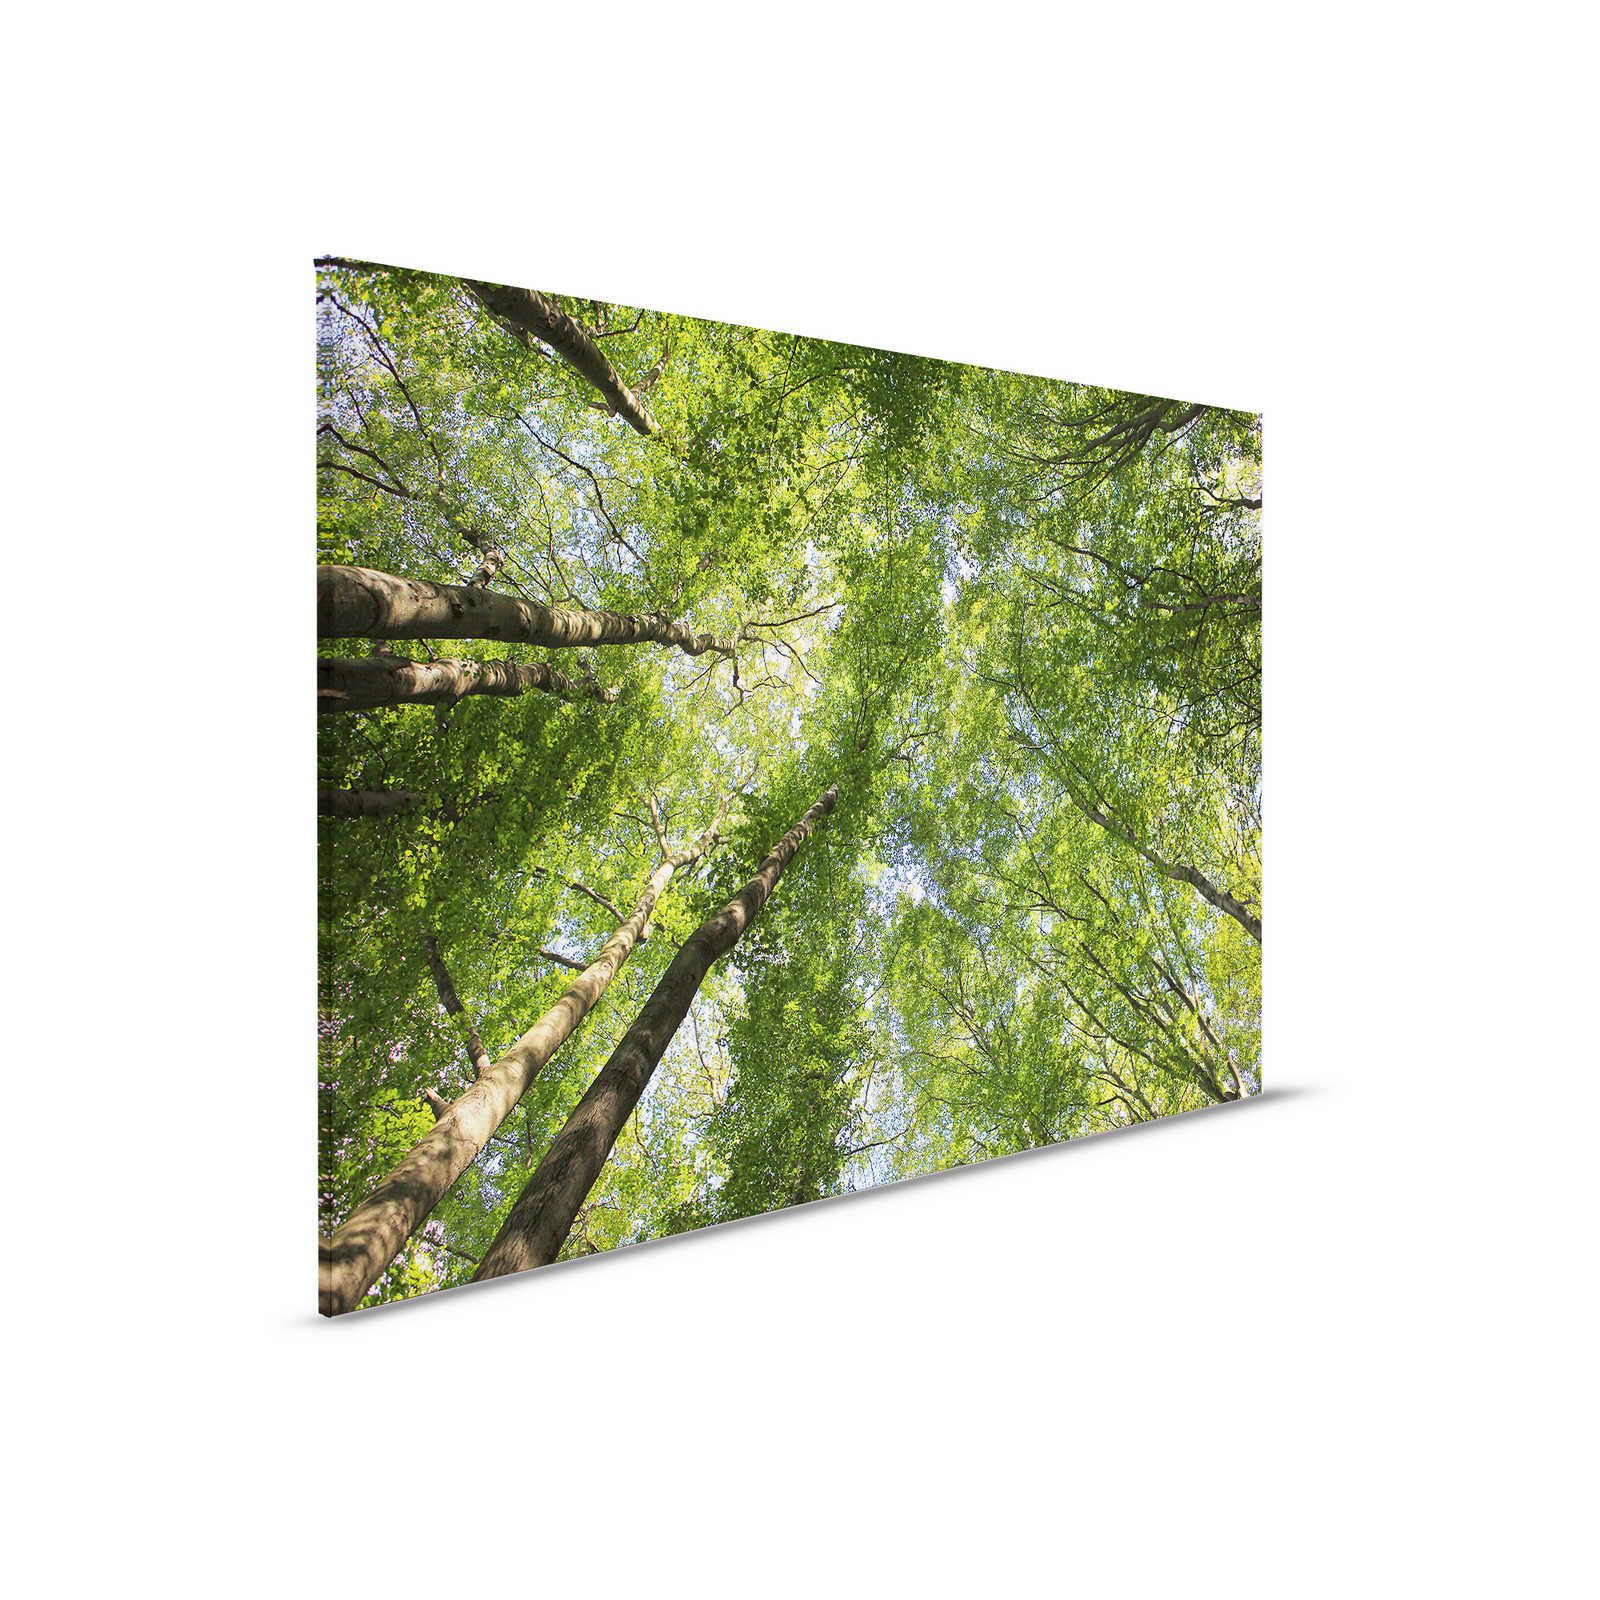 Foliage canvas picture with deciduous forest treetops - 0.90 m x 0.60 m
